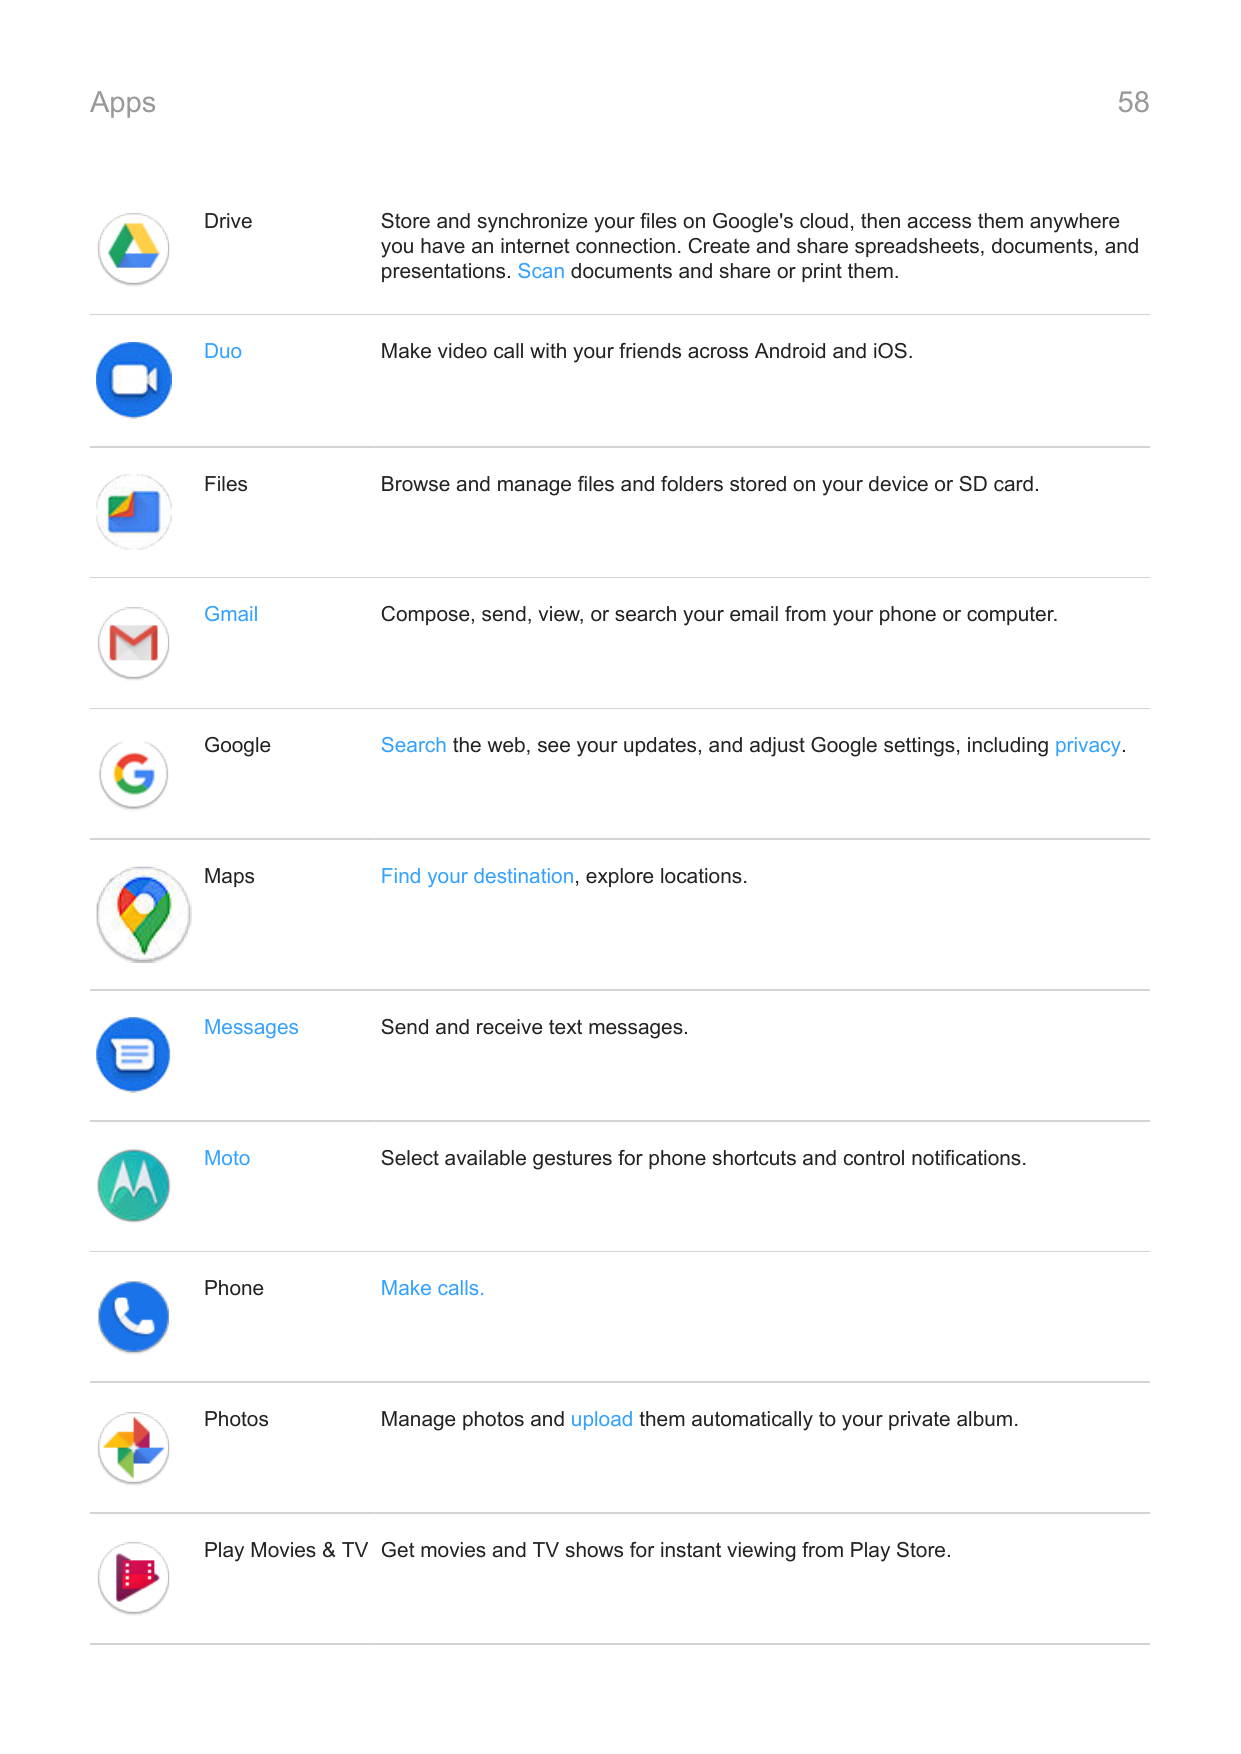 Apps58DriveStore and synchronize your files on Google's cloud, then access them anywhereyou have an internet connection. Create 